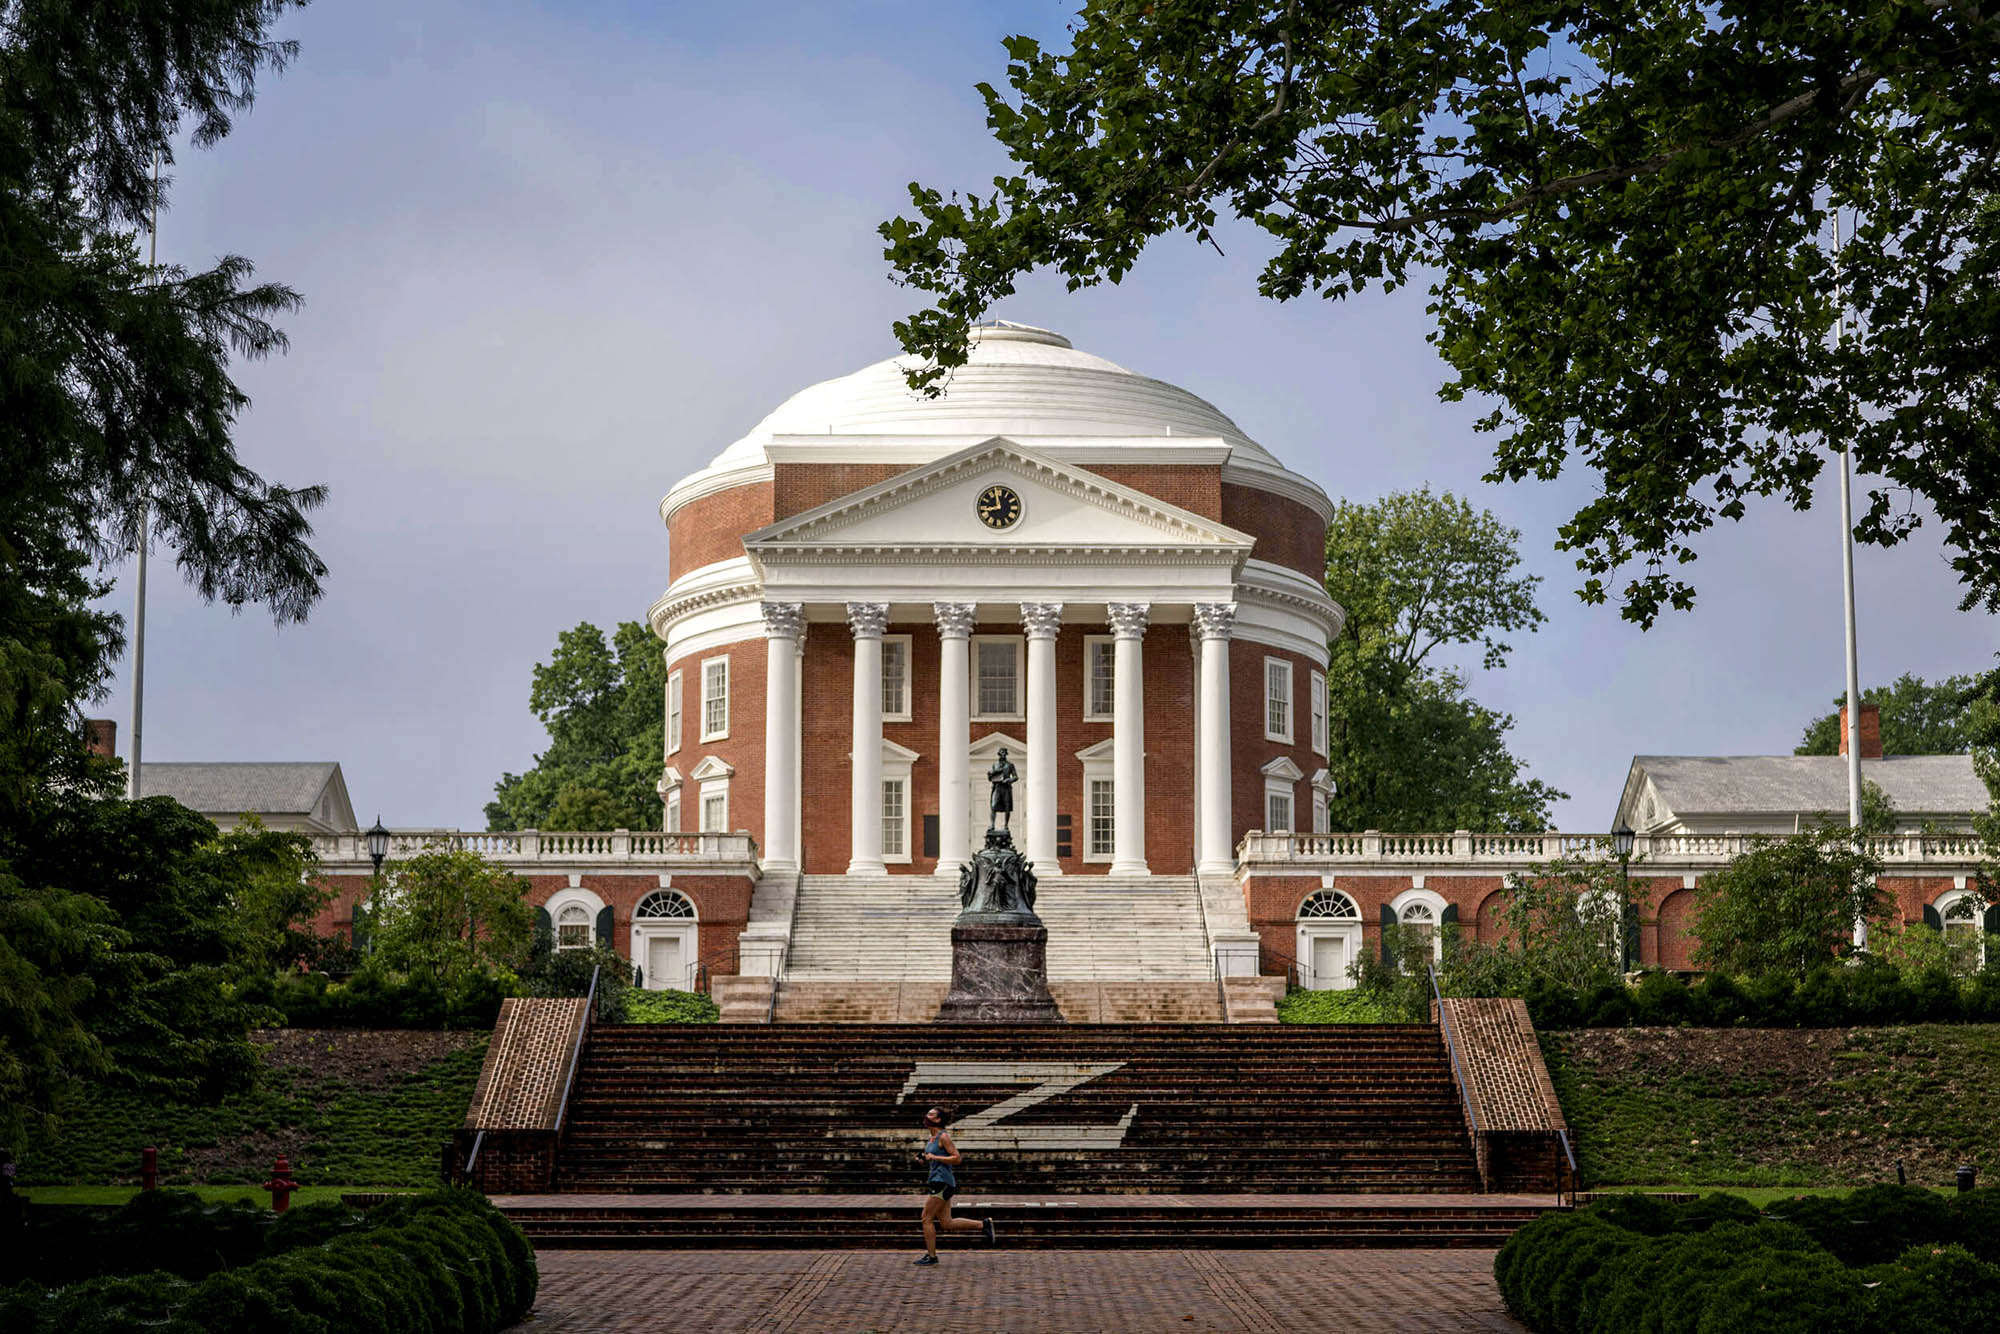 Rotunda with a statue in front